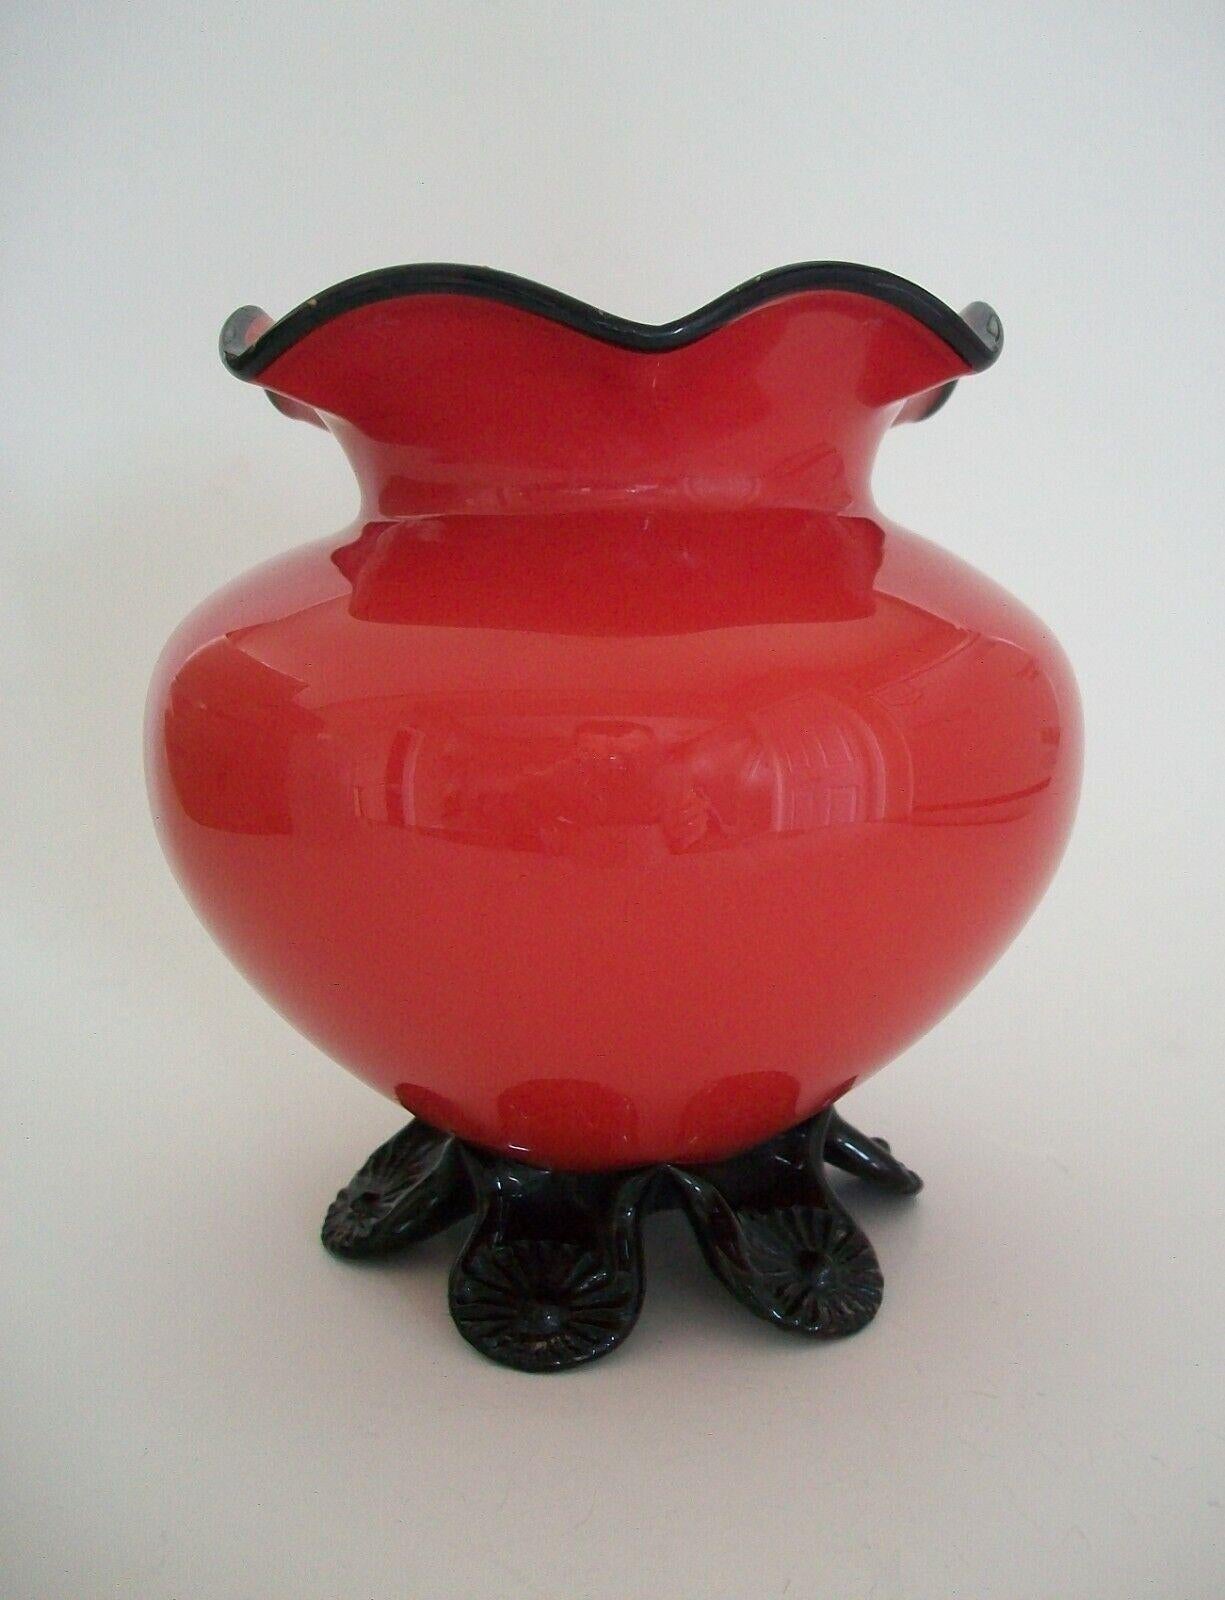 Antique Bohemian Jugendstil red Tango glass vase - possibly designed by Michael Powolny (1871-1954) and manufactured by Loetz - rare form with ruffled rim and black glass edge - black glass base with glass making tool marks as decoration - striking